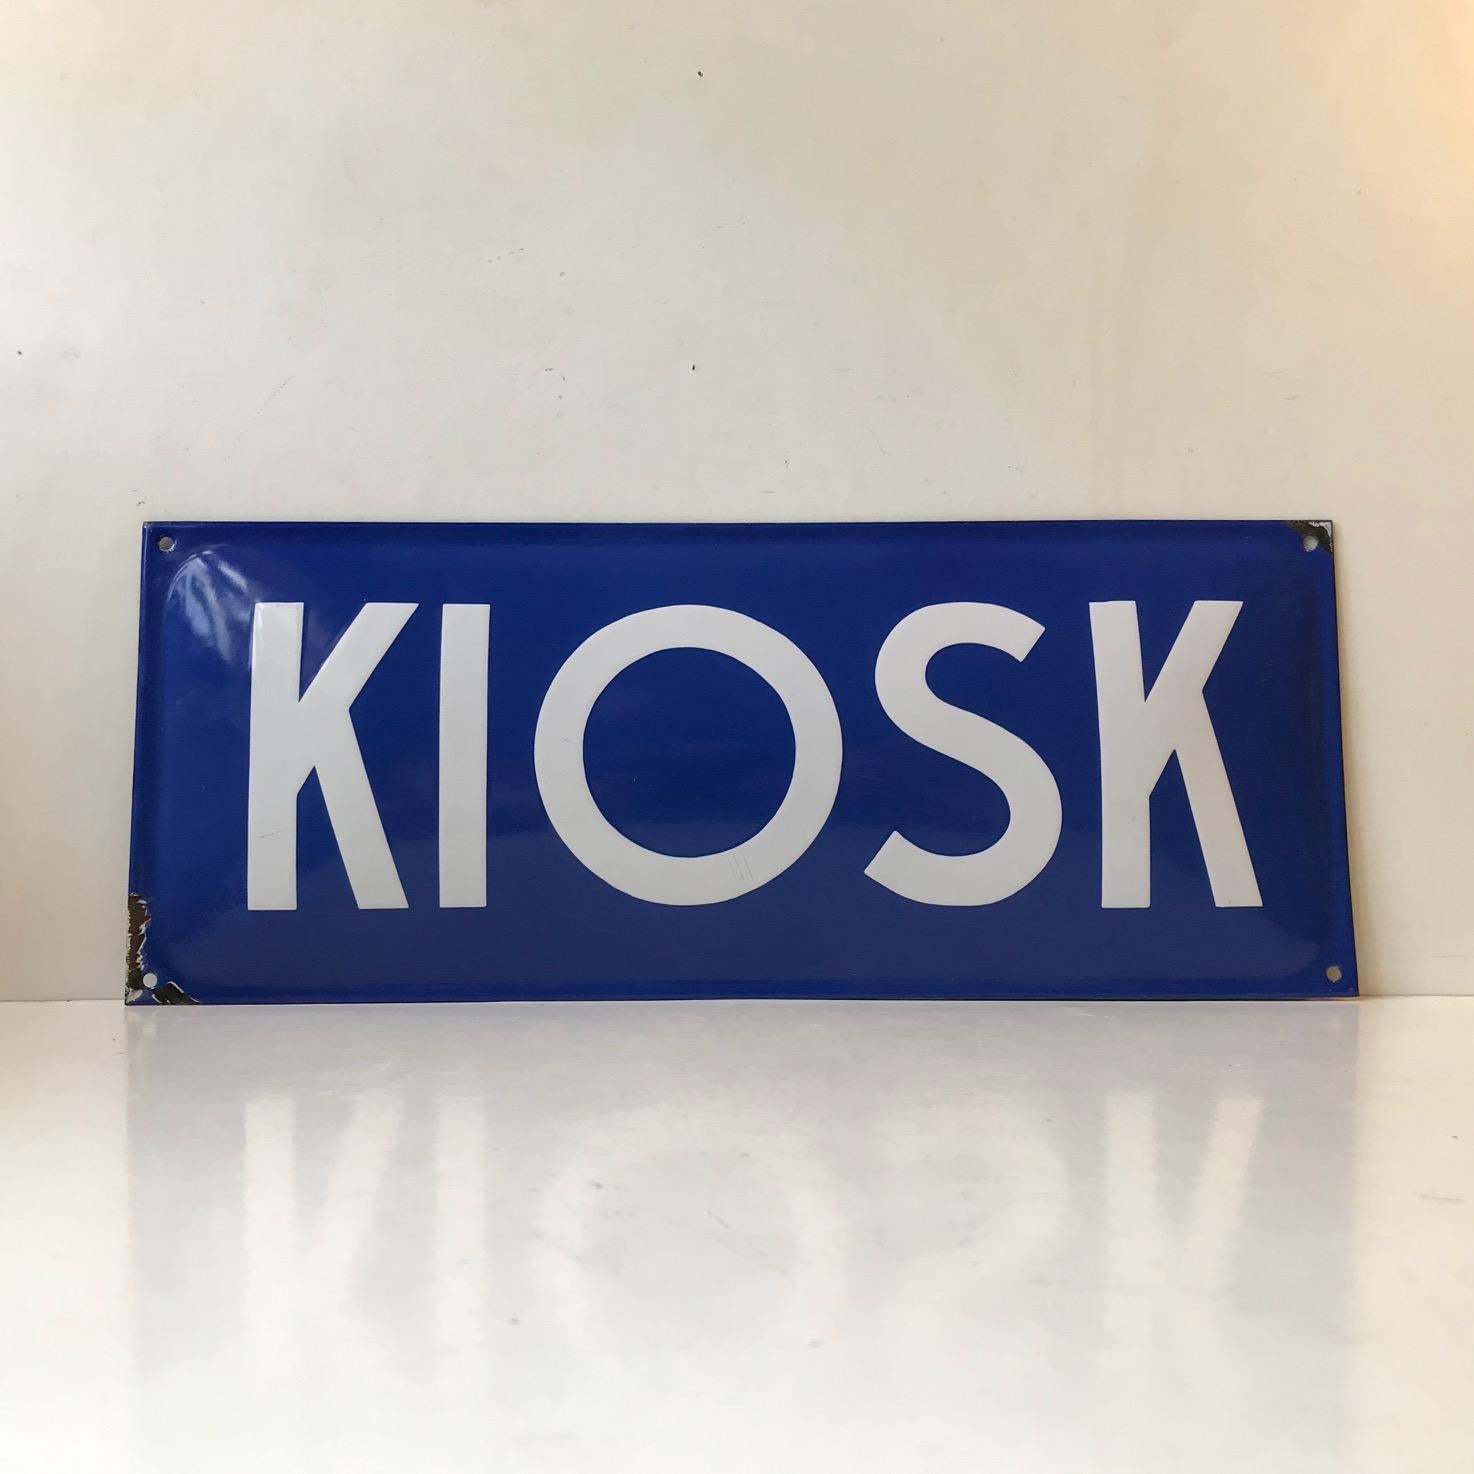 Slightly concave old enamel sign from a Kiosk (small shop with tobacco, newspapers, beverages, sweets etc). Very clean design and Bauhaus typical simple typography. It has spend its life in Copenhagen outside a small Kiosk in Nørrebrogade that